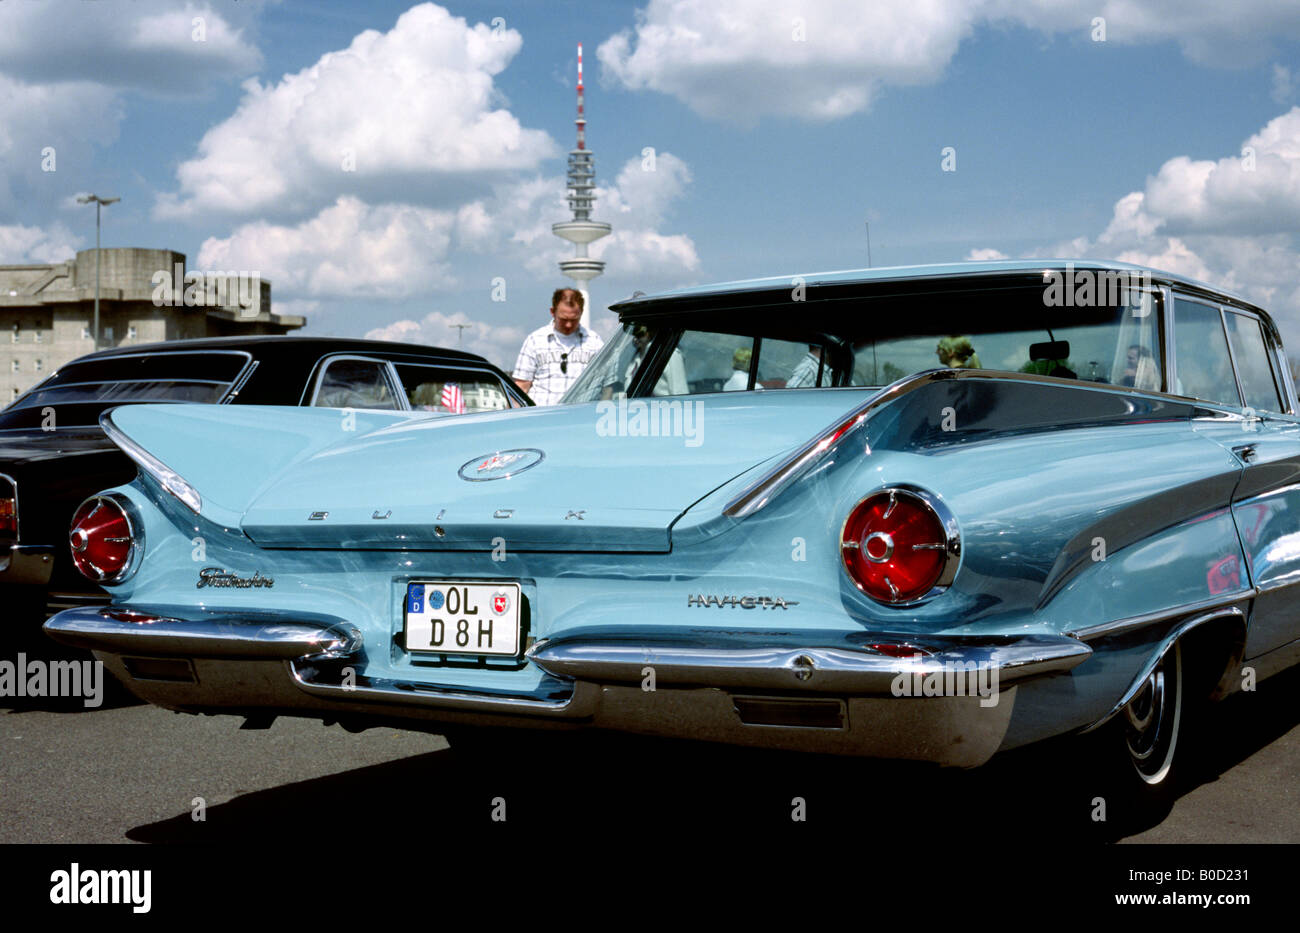 May 3, 2008 - Tail fins of a Buick Invicta (Series 4600) at the Street Mag Show at Hamburg's Heiligengeistfeld in Germany. Stock Photo